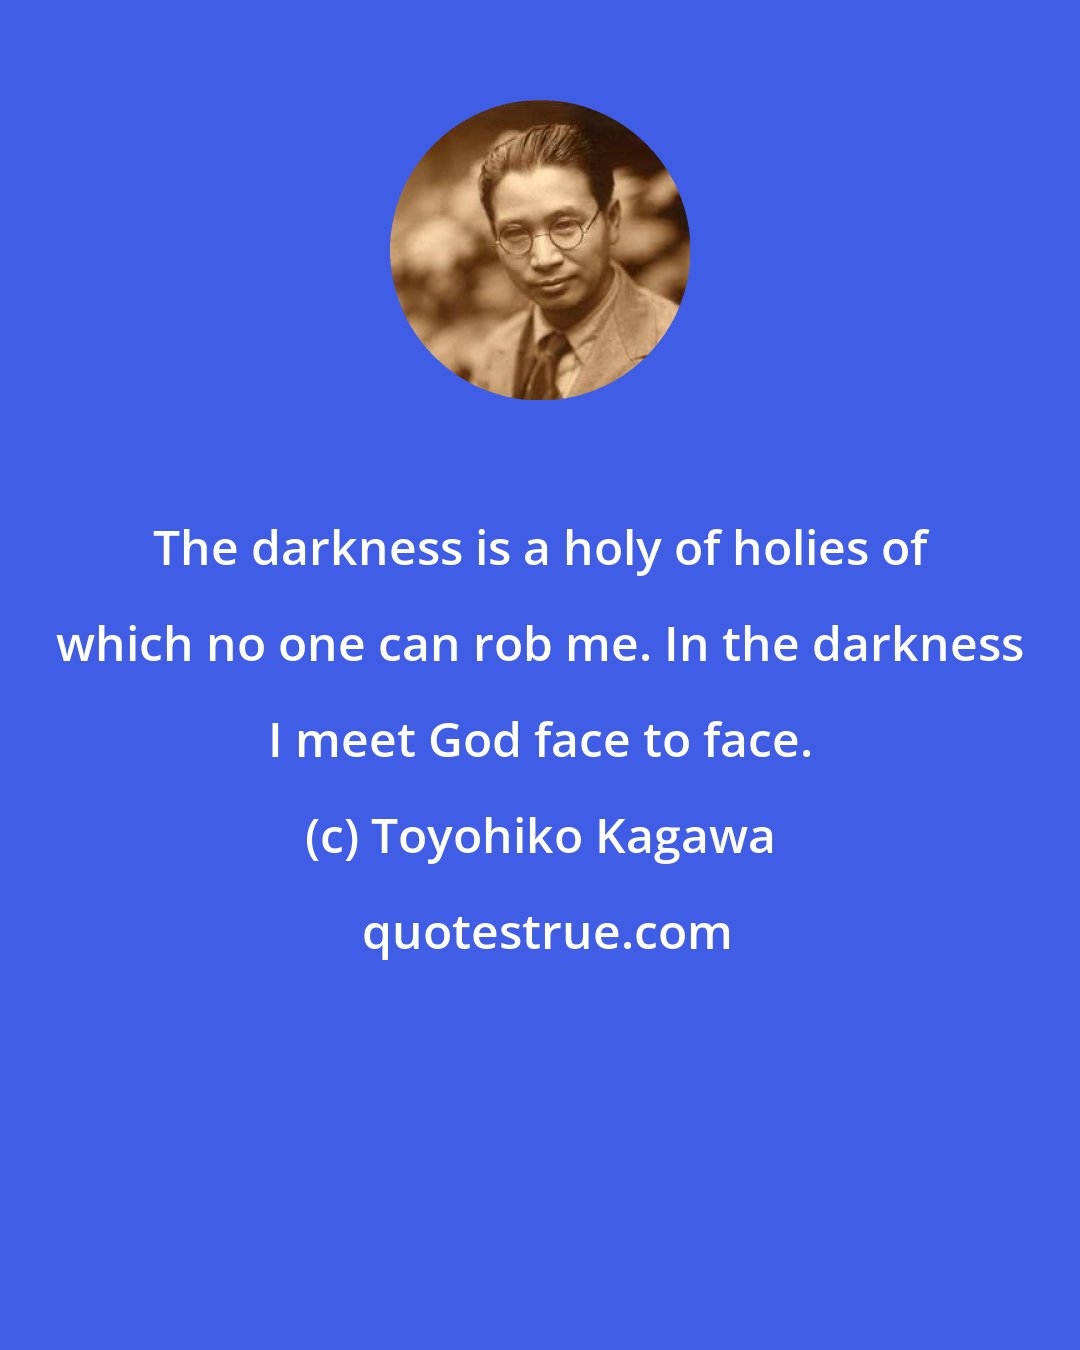 Toyohiko Kagawa: The darkness is a holy of holies of which no one can rob me. In the darkness I meet God face to face.